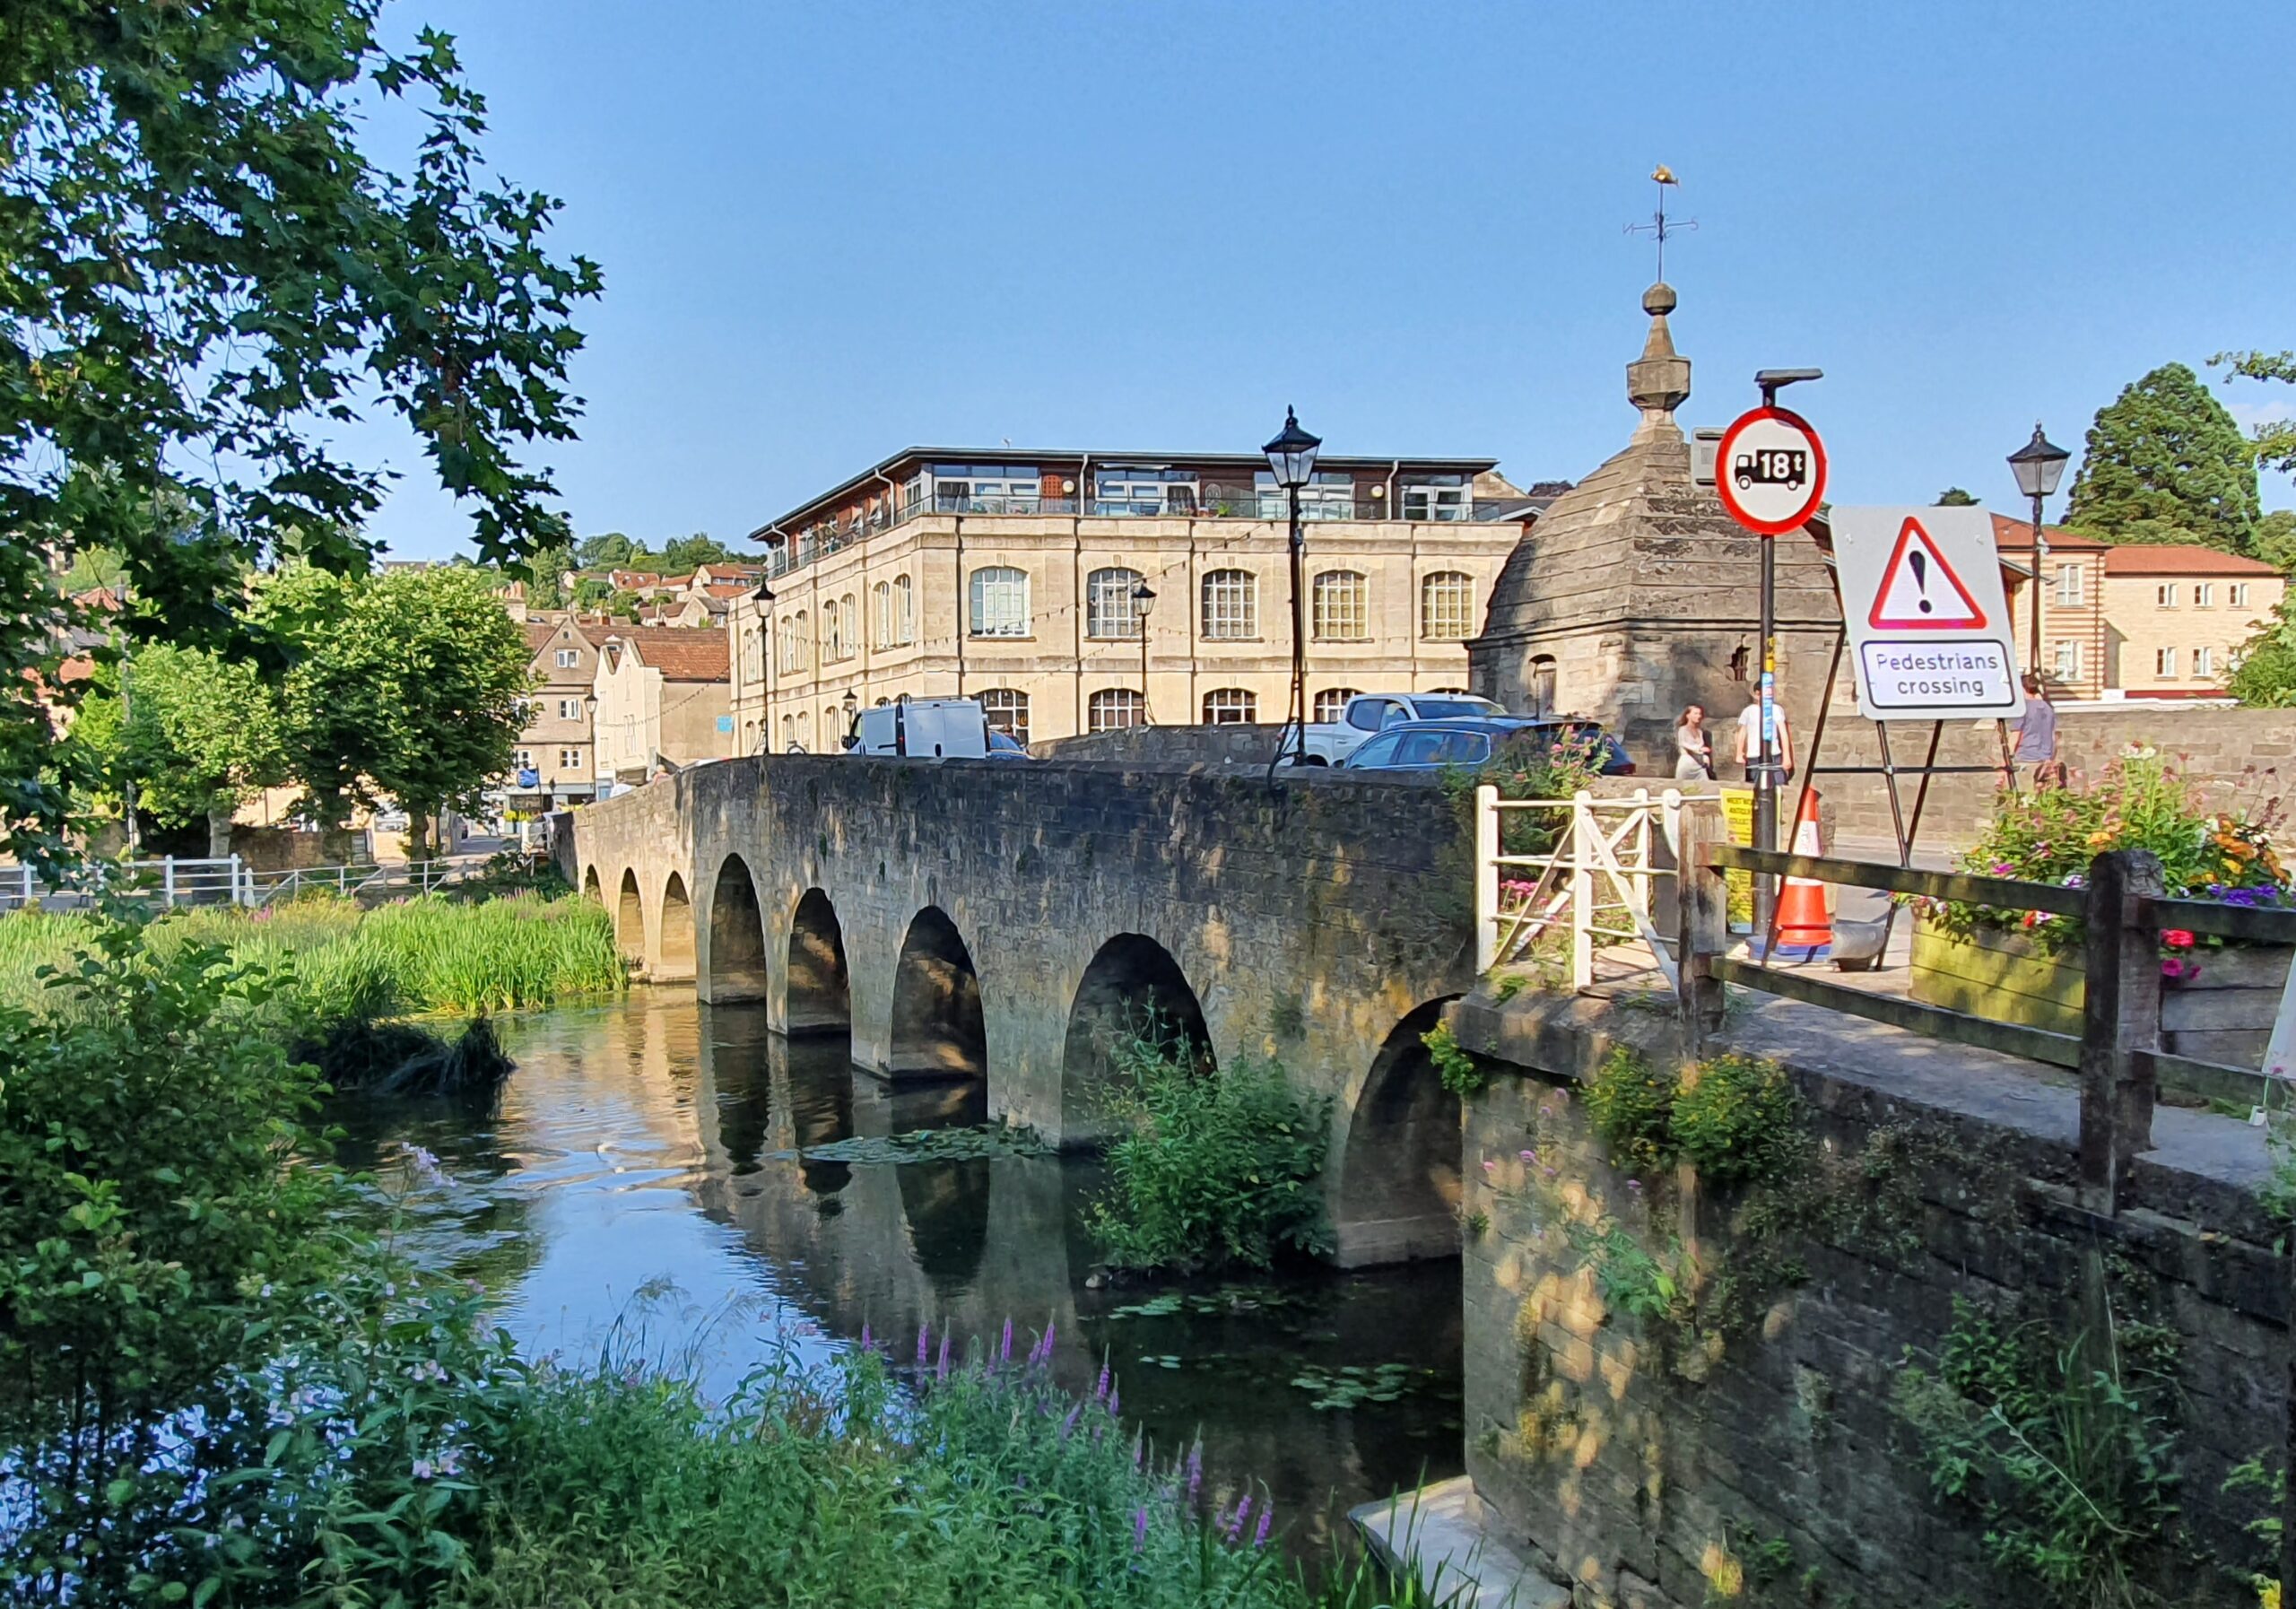 places to visit from bradford on avon